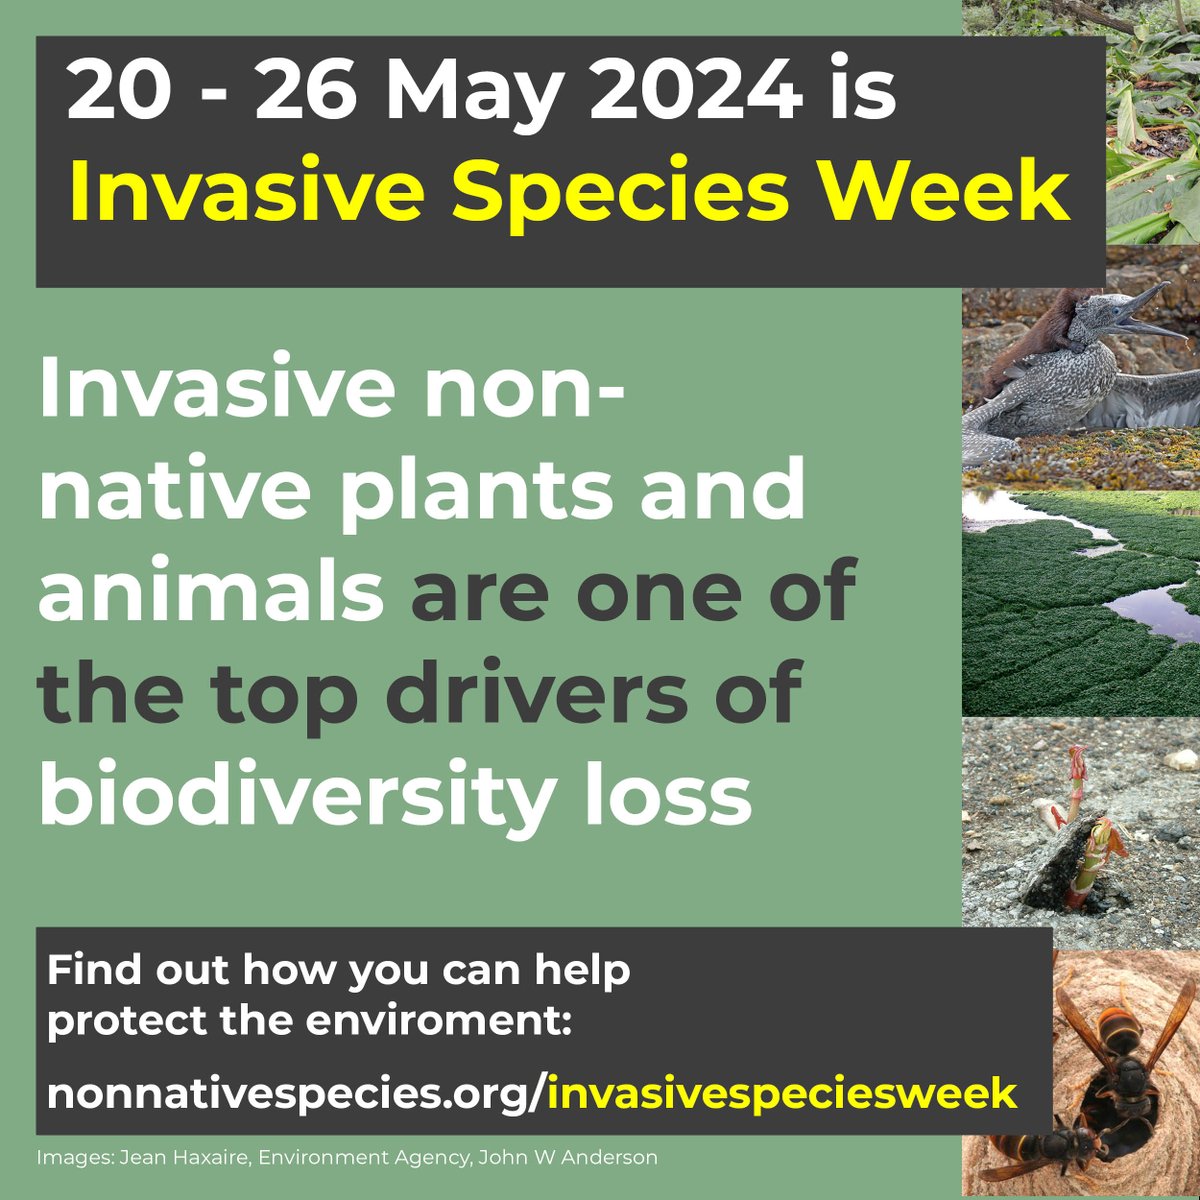 Invasive Species Week starts today - learn more about this global threat to biodiversity, costing Scotland £246m a year. Join NatureScot's Stan Whitaker tomorrow for a webinar on how Scotland monitors & responds to non-native species threats orlo.uk/vUarg #INNSWeek